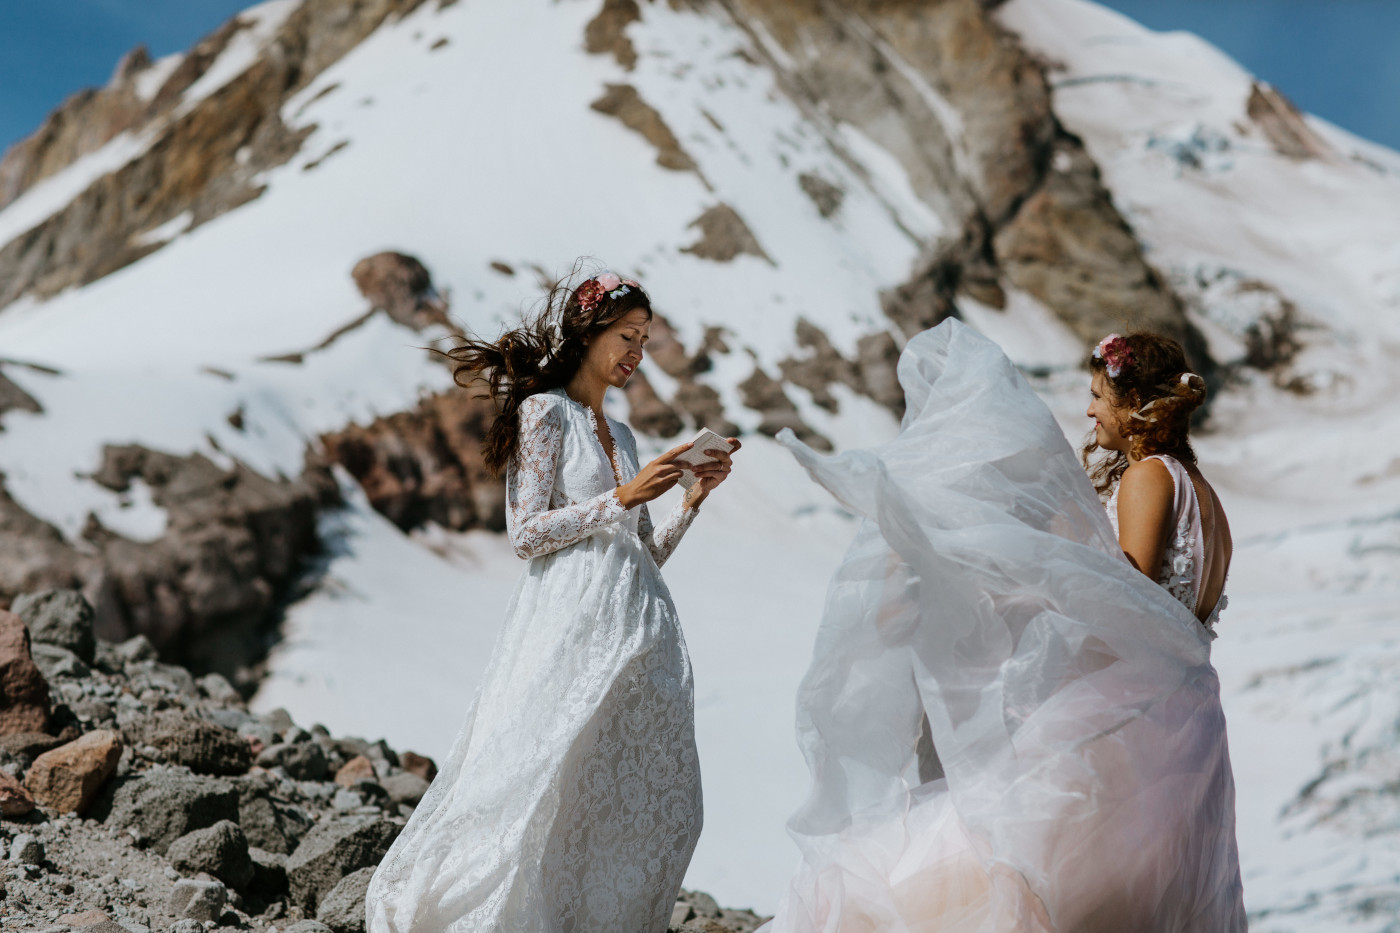 Margaux and Heather saying their vows during a wind gust. Elopement photography at Mount Hood by Sienna Plus Josh.